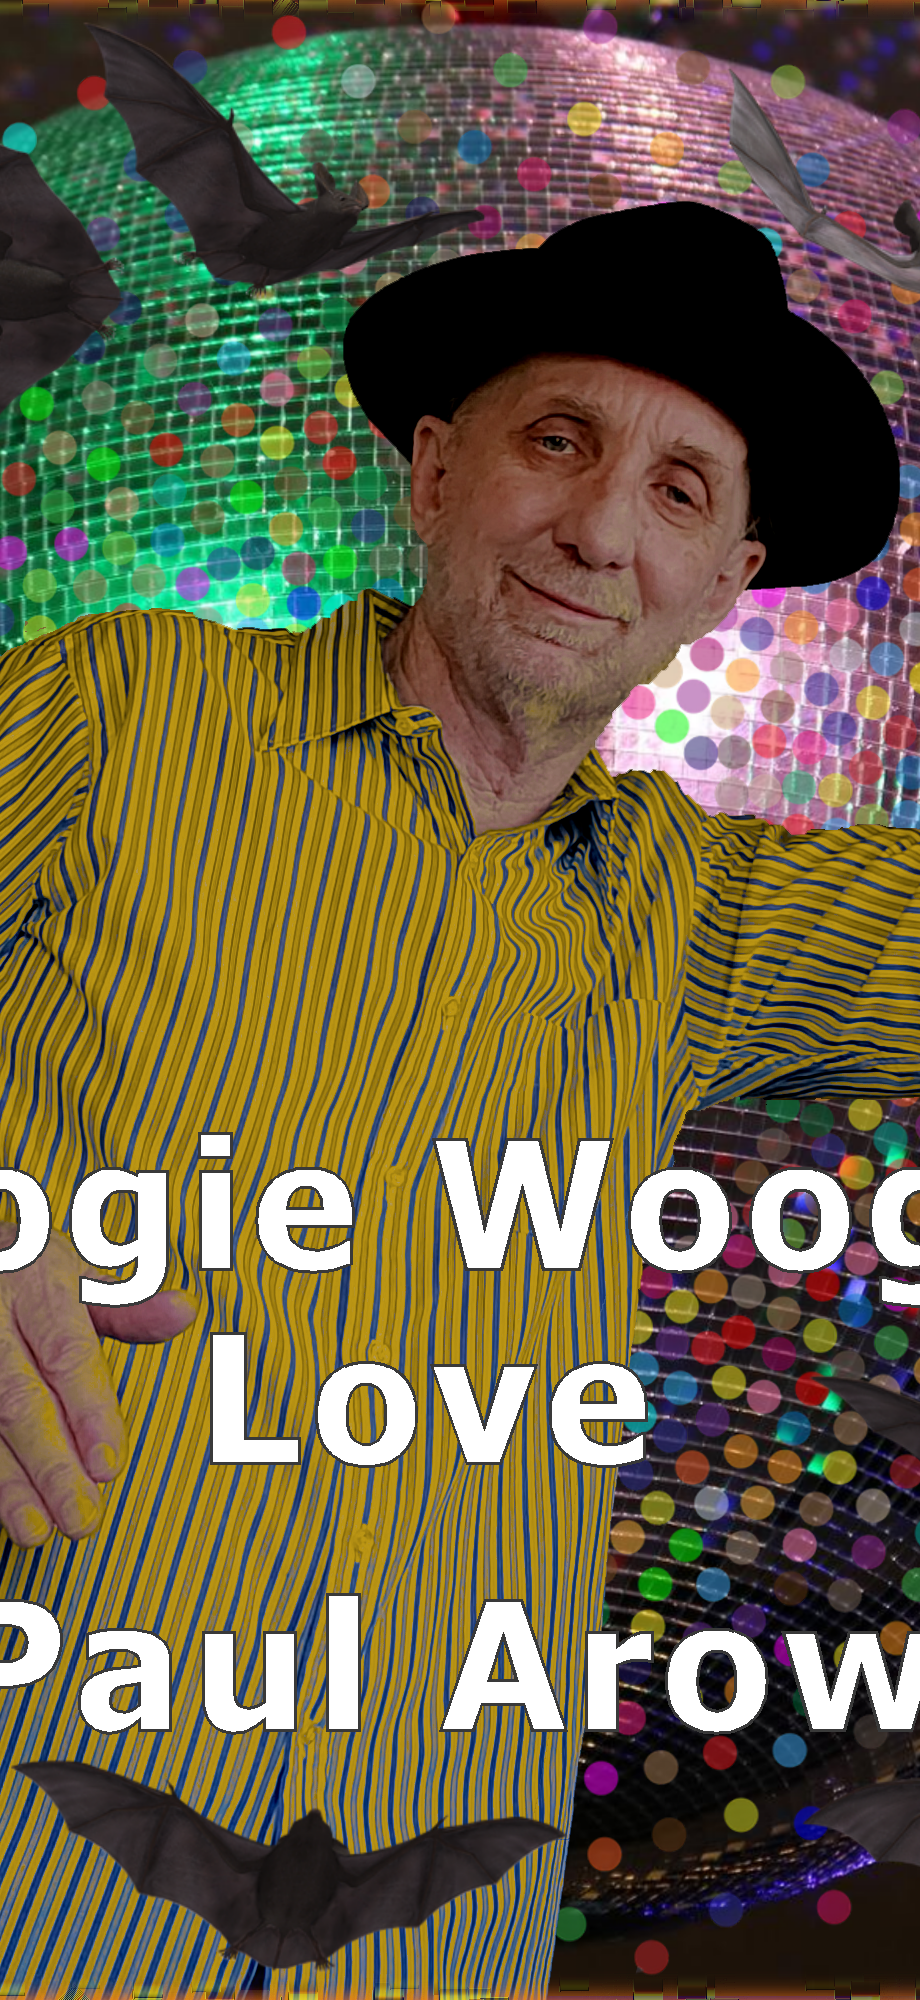 Boogie Woogie Love is a single written and performed by Paul Arow